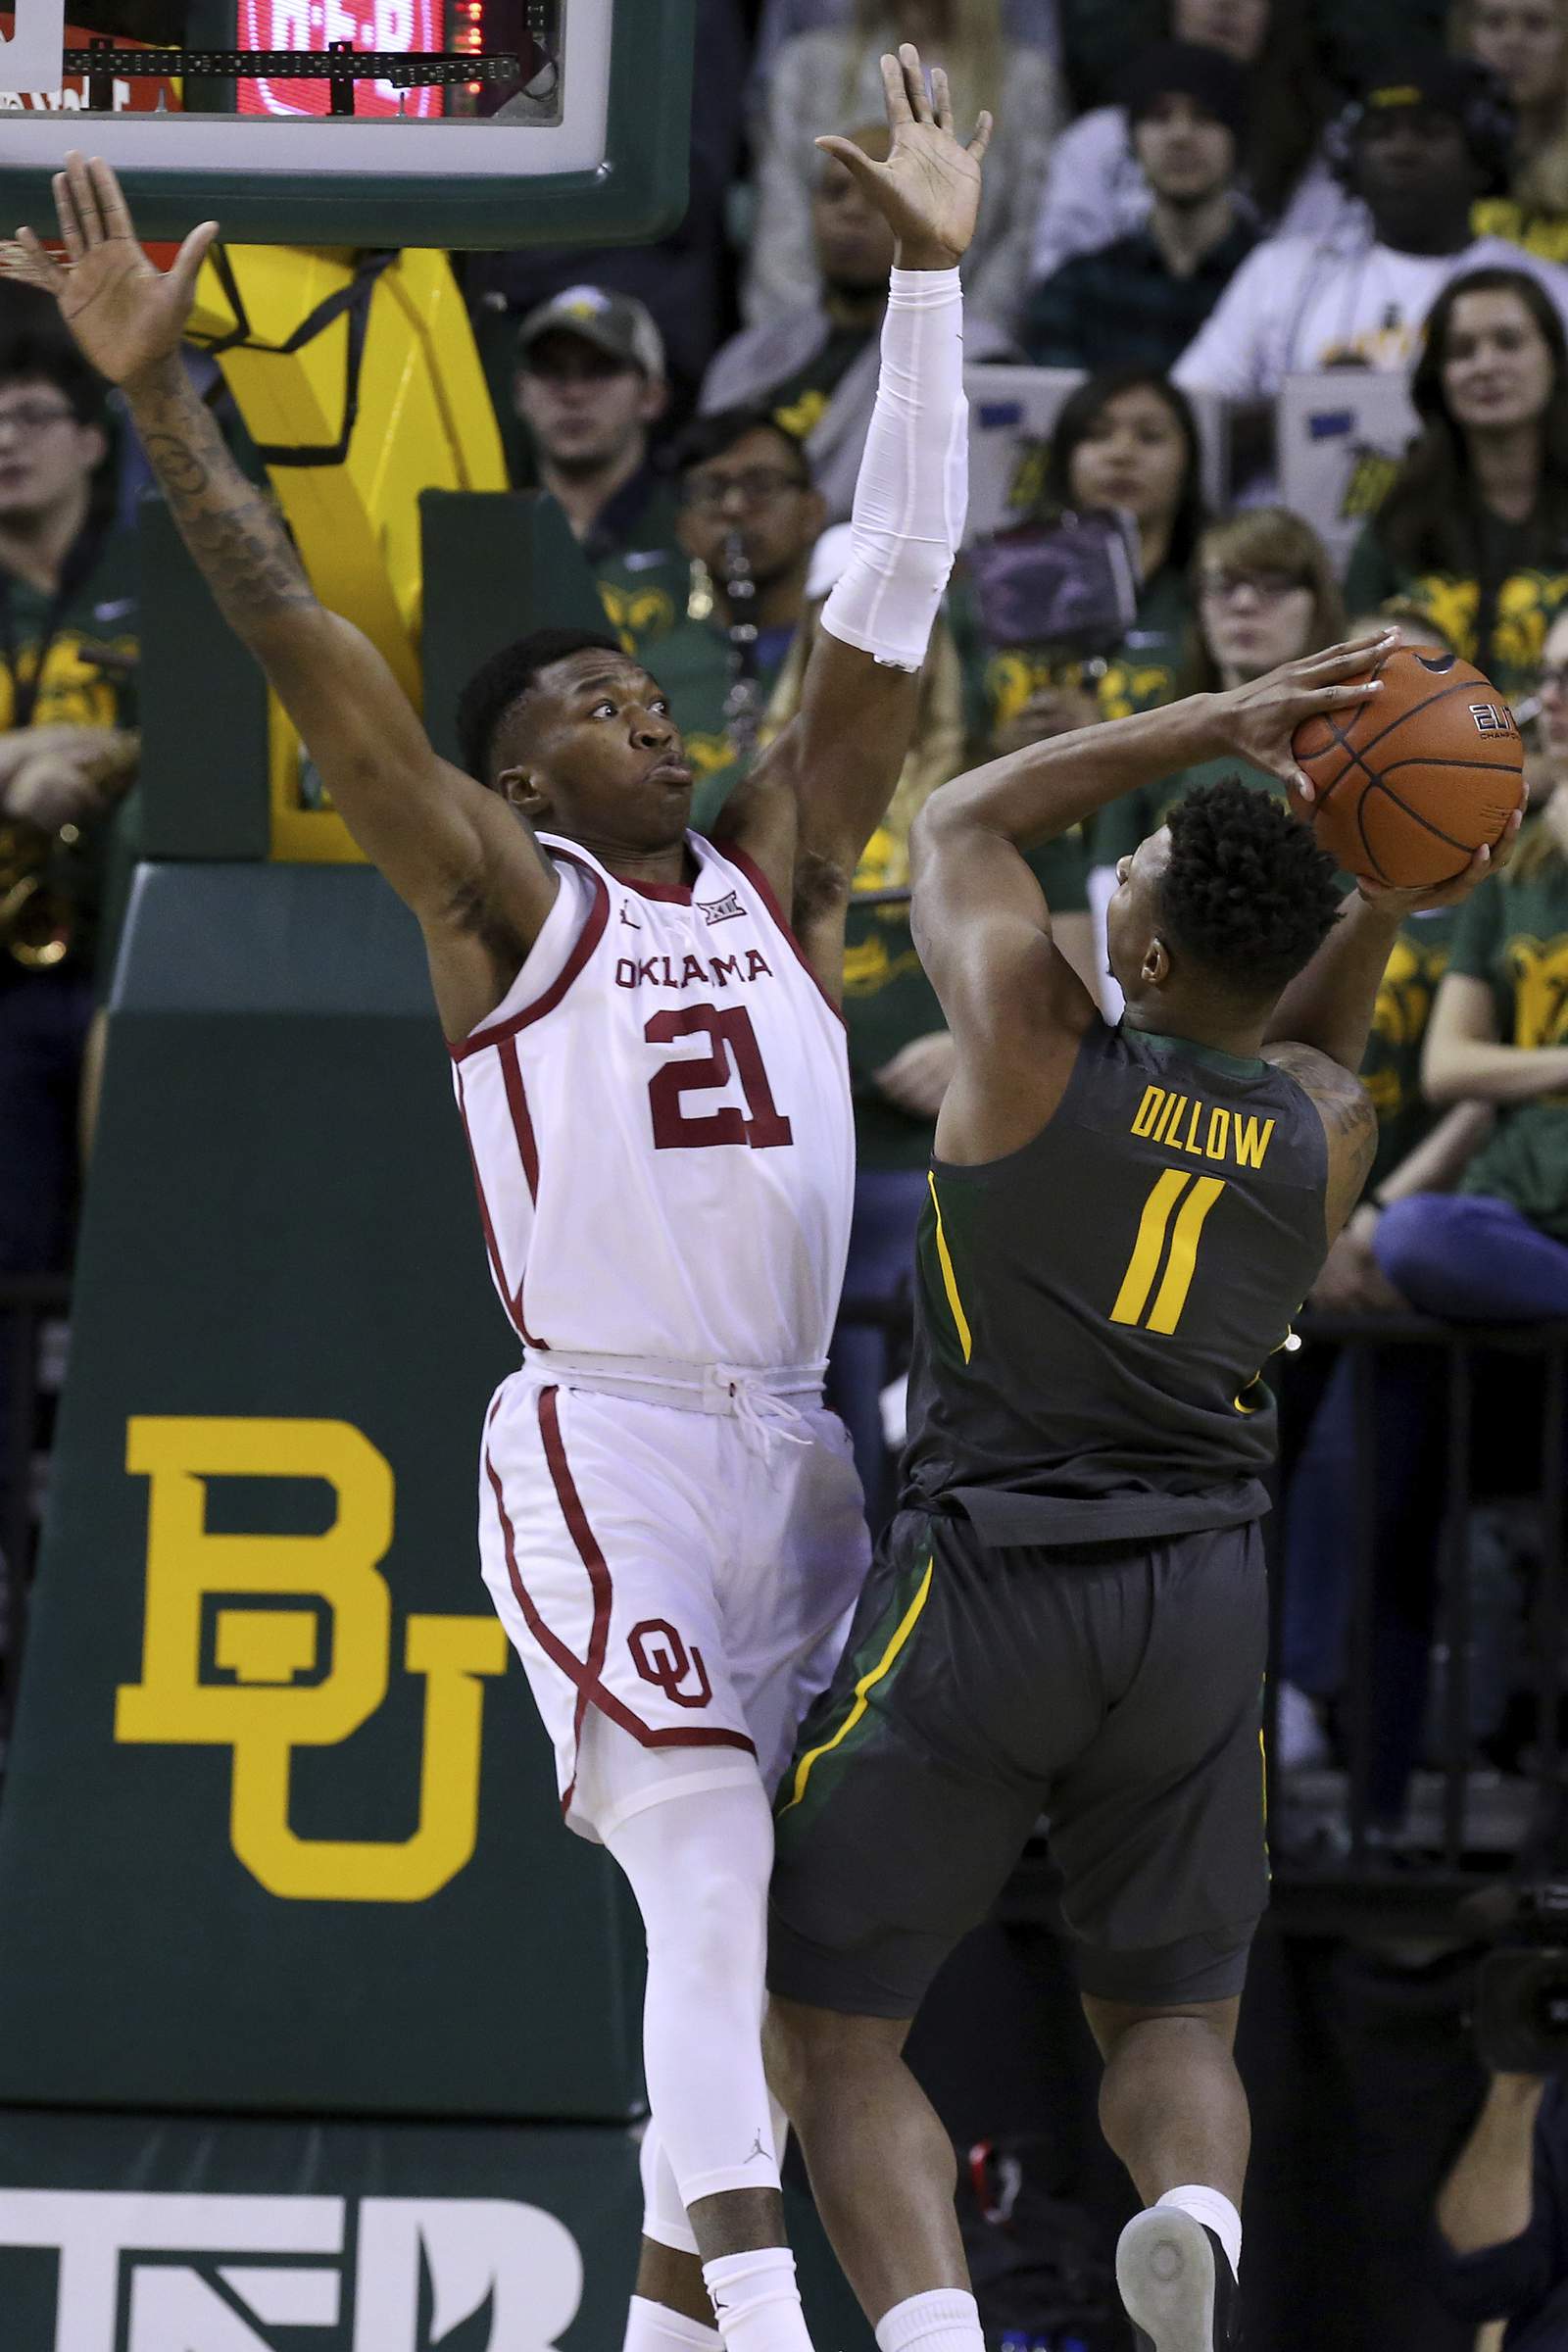 Baylor up to No. 1, beats Oklahoma 61-57 for 15th win in row